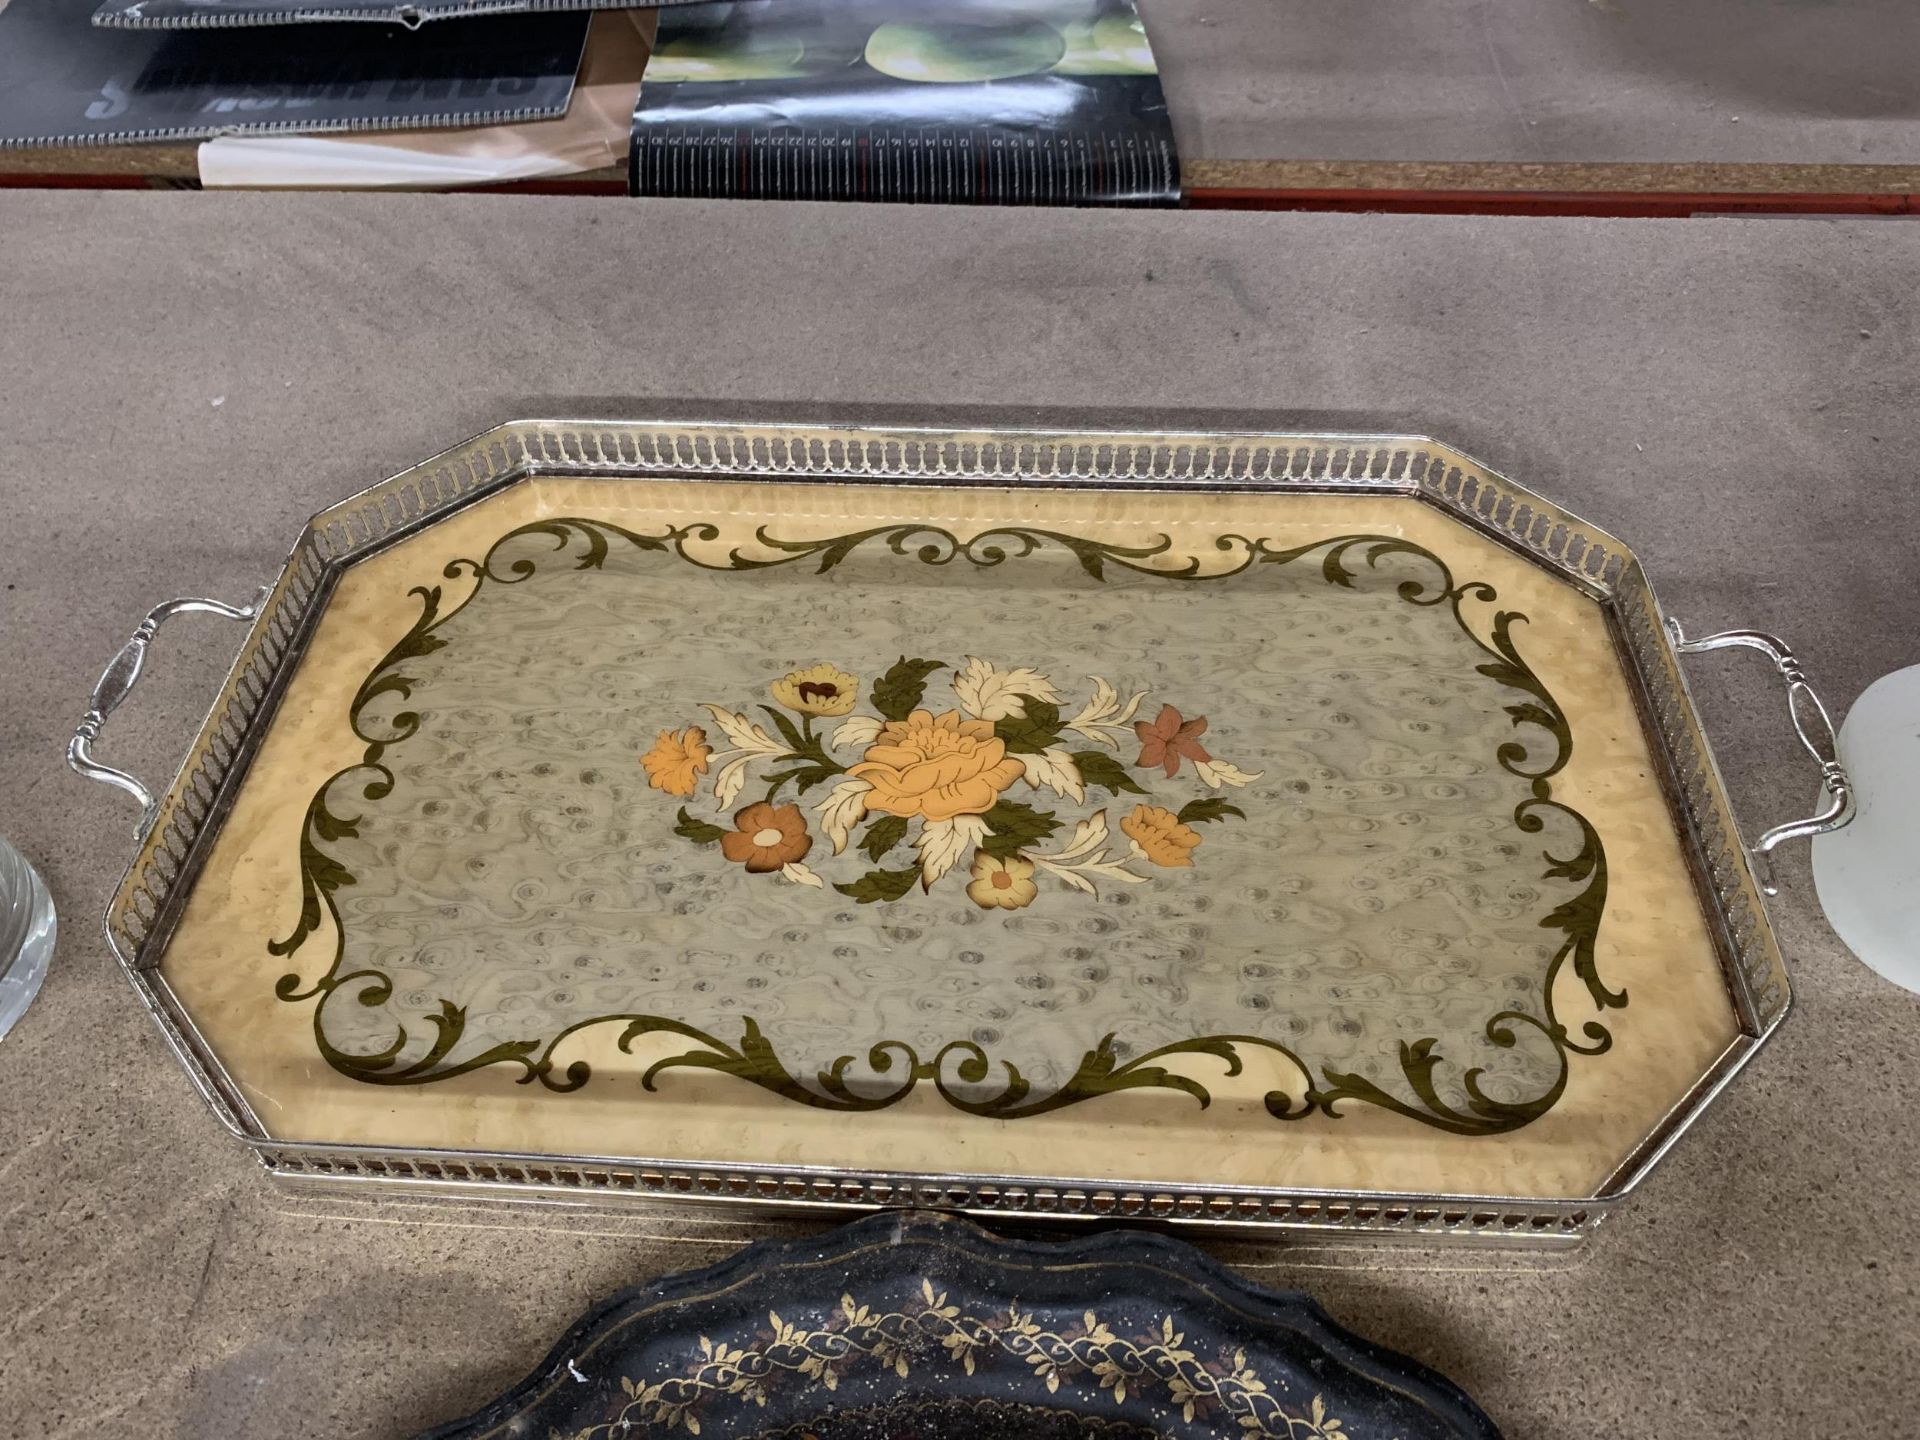 TWO VINTAGE TRAYS TO INCLUDE A BLACK METAL ONE WITH FLORAL DECORATION - Image 2 of 3